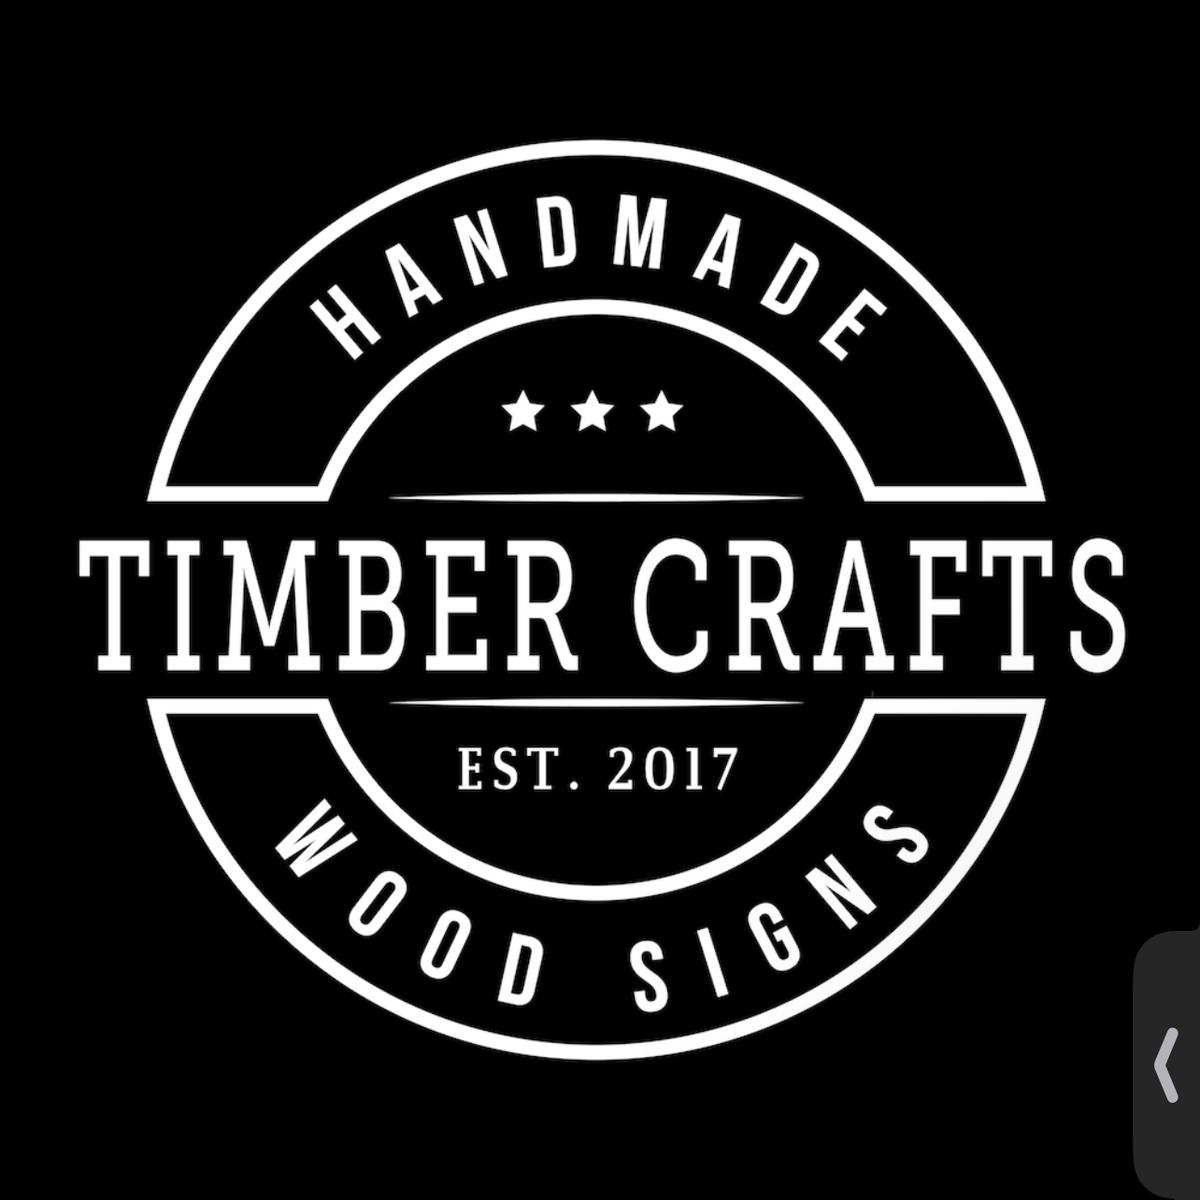 Timber Crafts's images